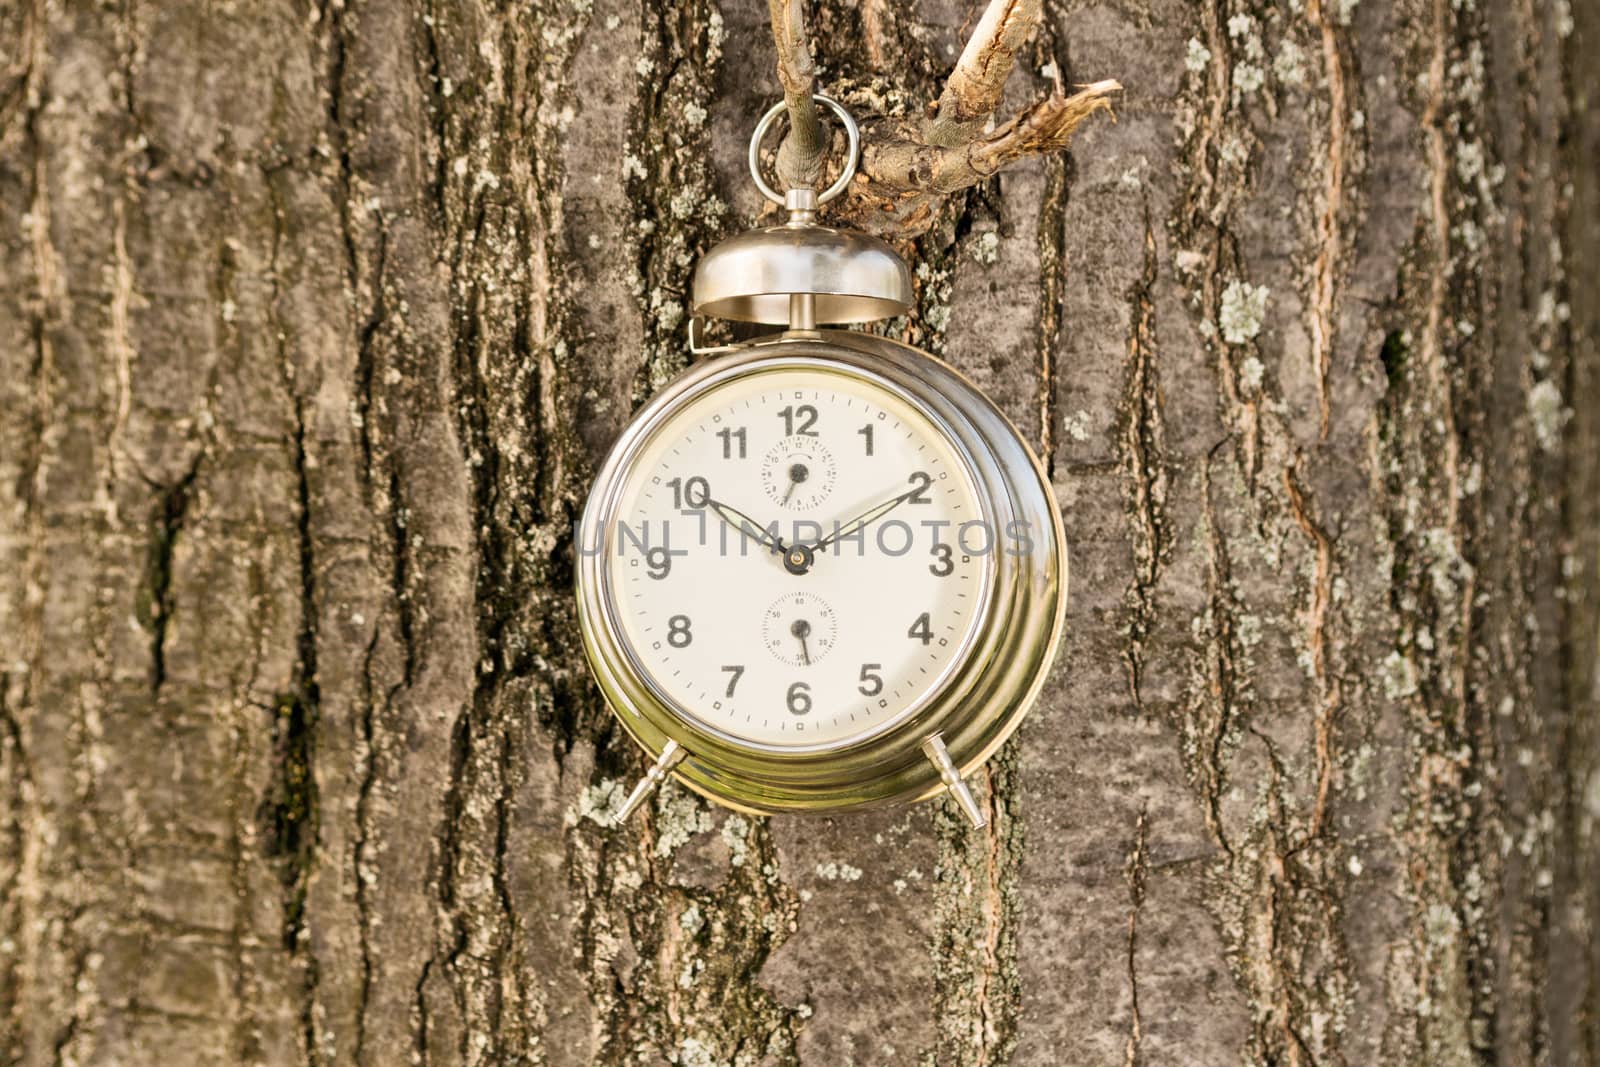 Time is ticking. Old fashioned clock hanged on a tree branch.